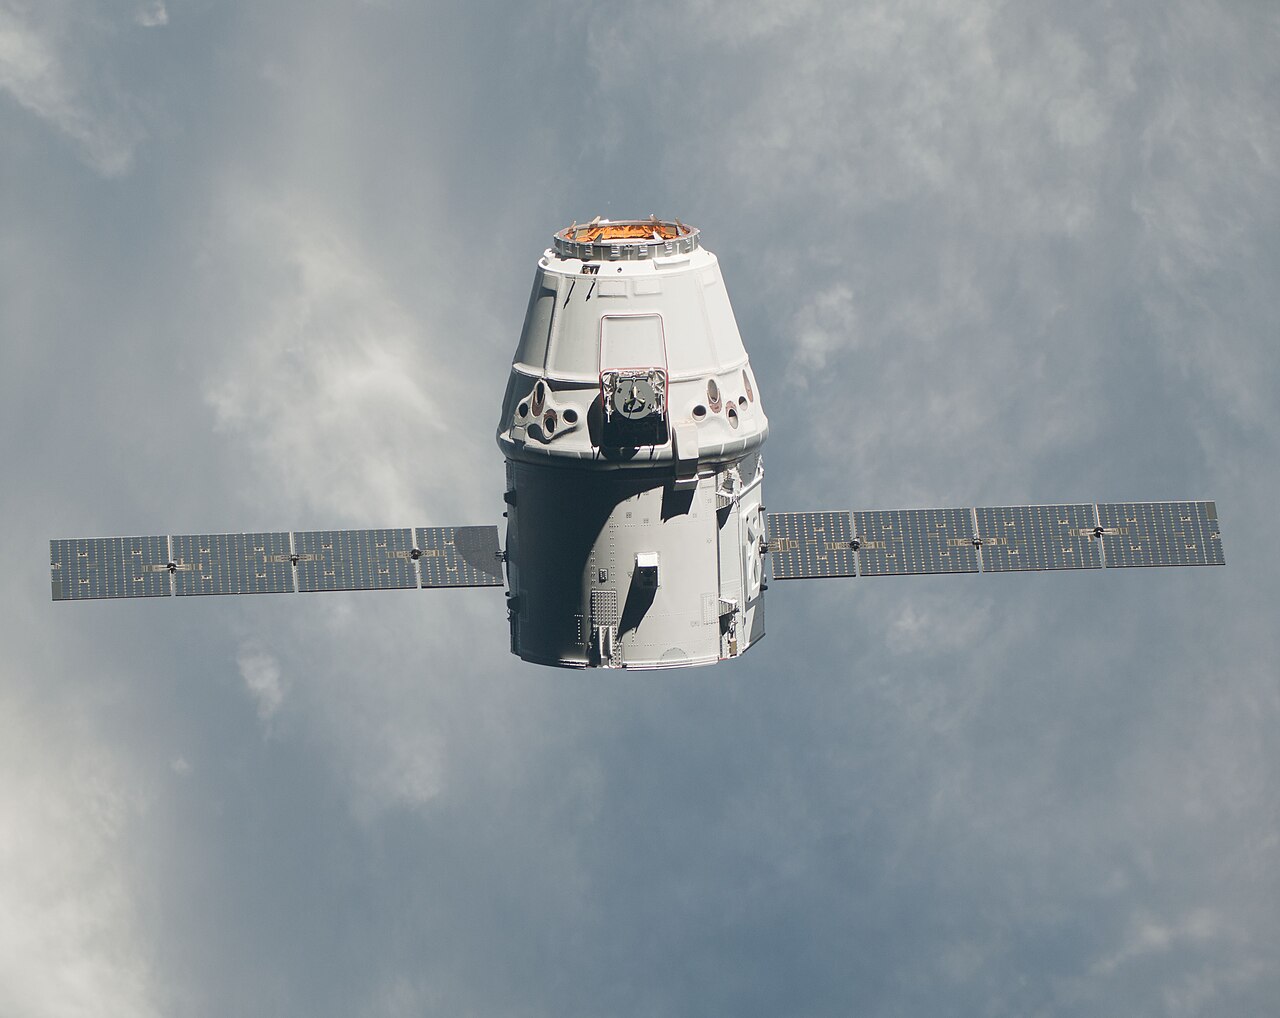 1280px-ISS-31_SpaceX_Dragon_commercial_cargo_craft_approaches_the_ISS_-_crop.jpg